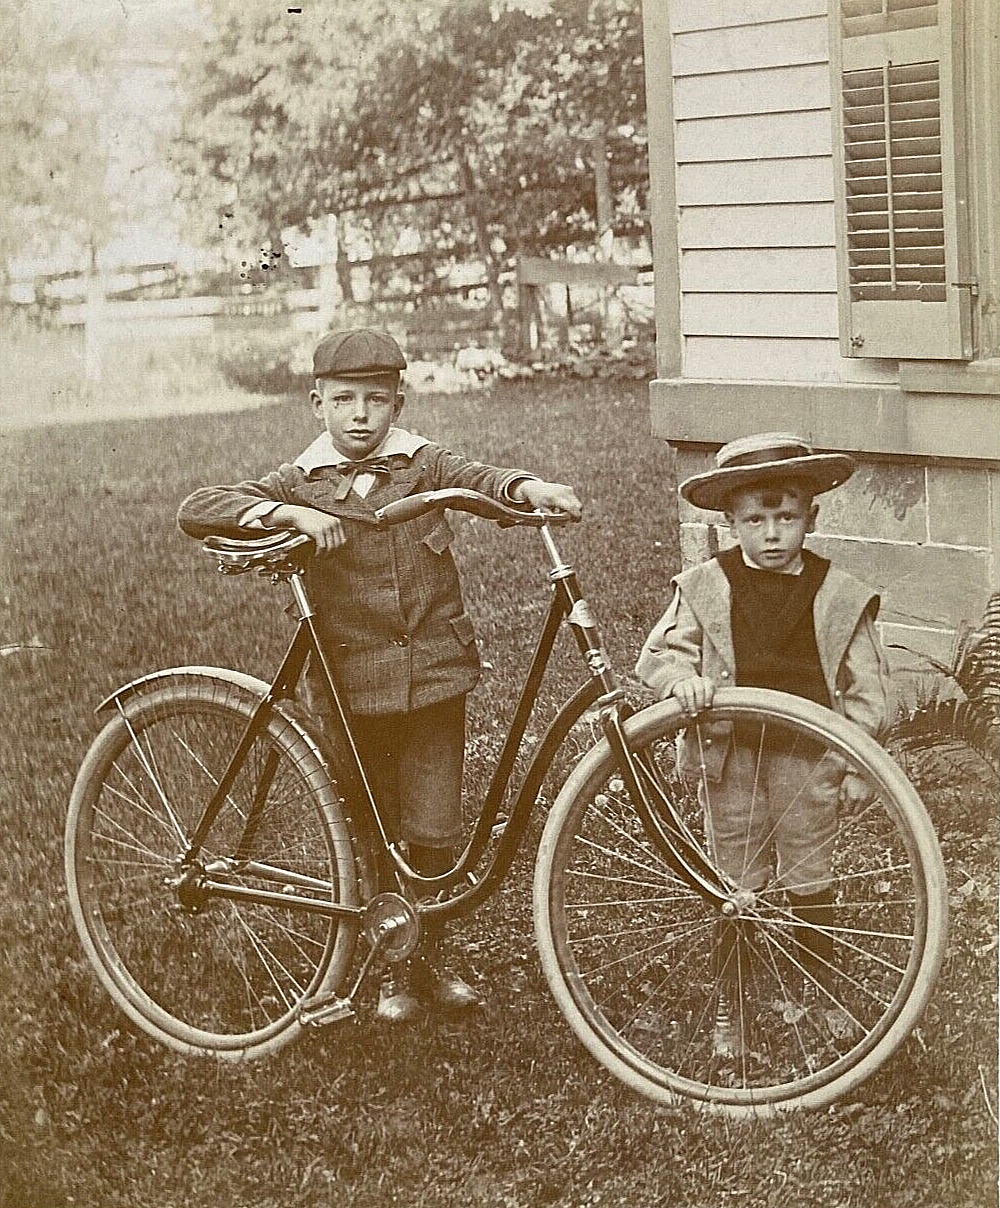 ORIGINAL - CRESCENT BRAND BICYCLE with CHILDREN ID'd PHOTOGRAPH c1890